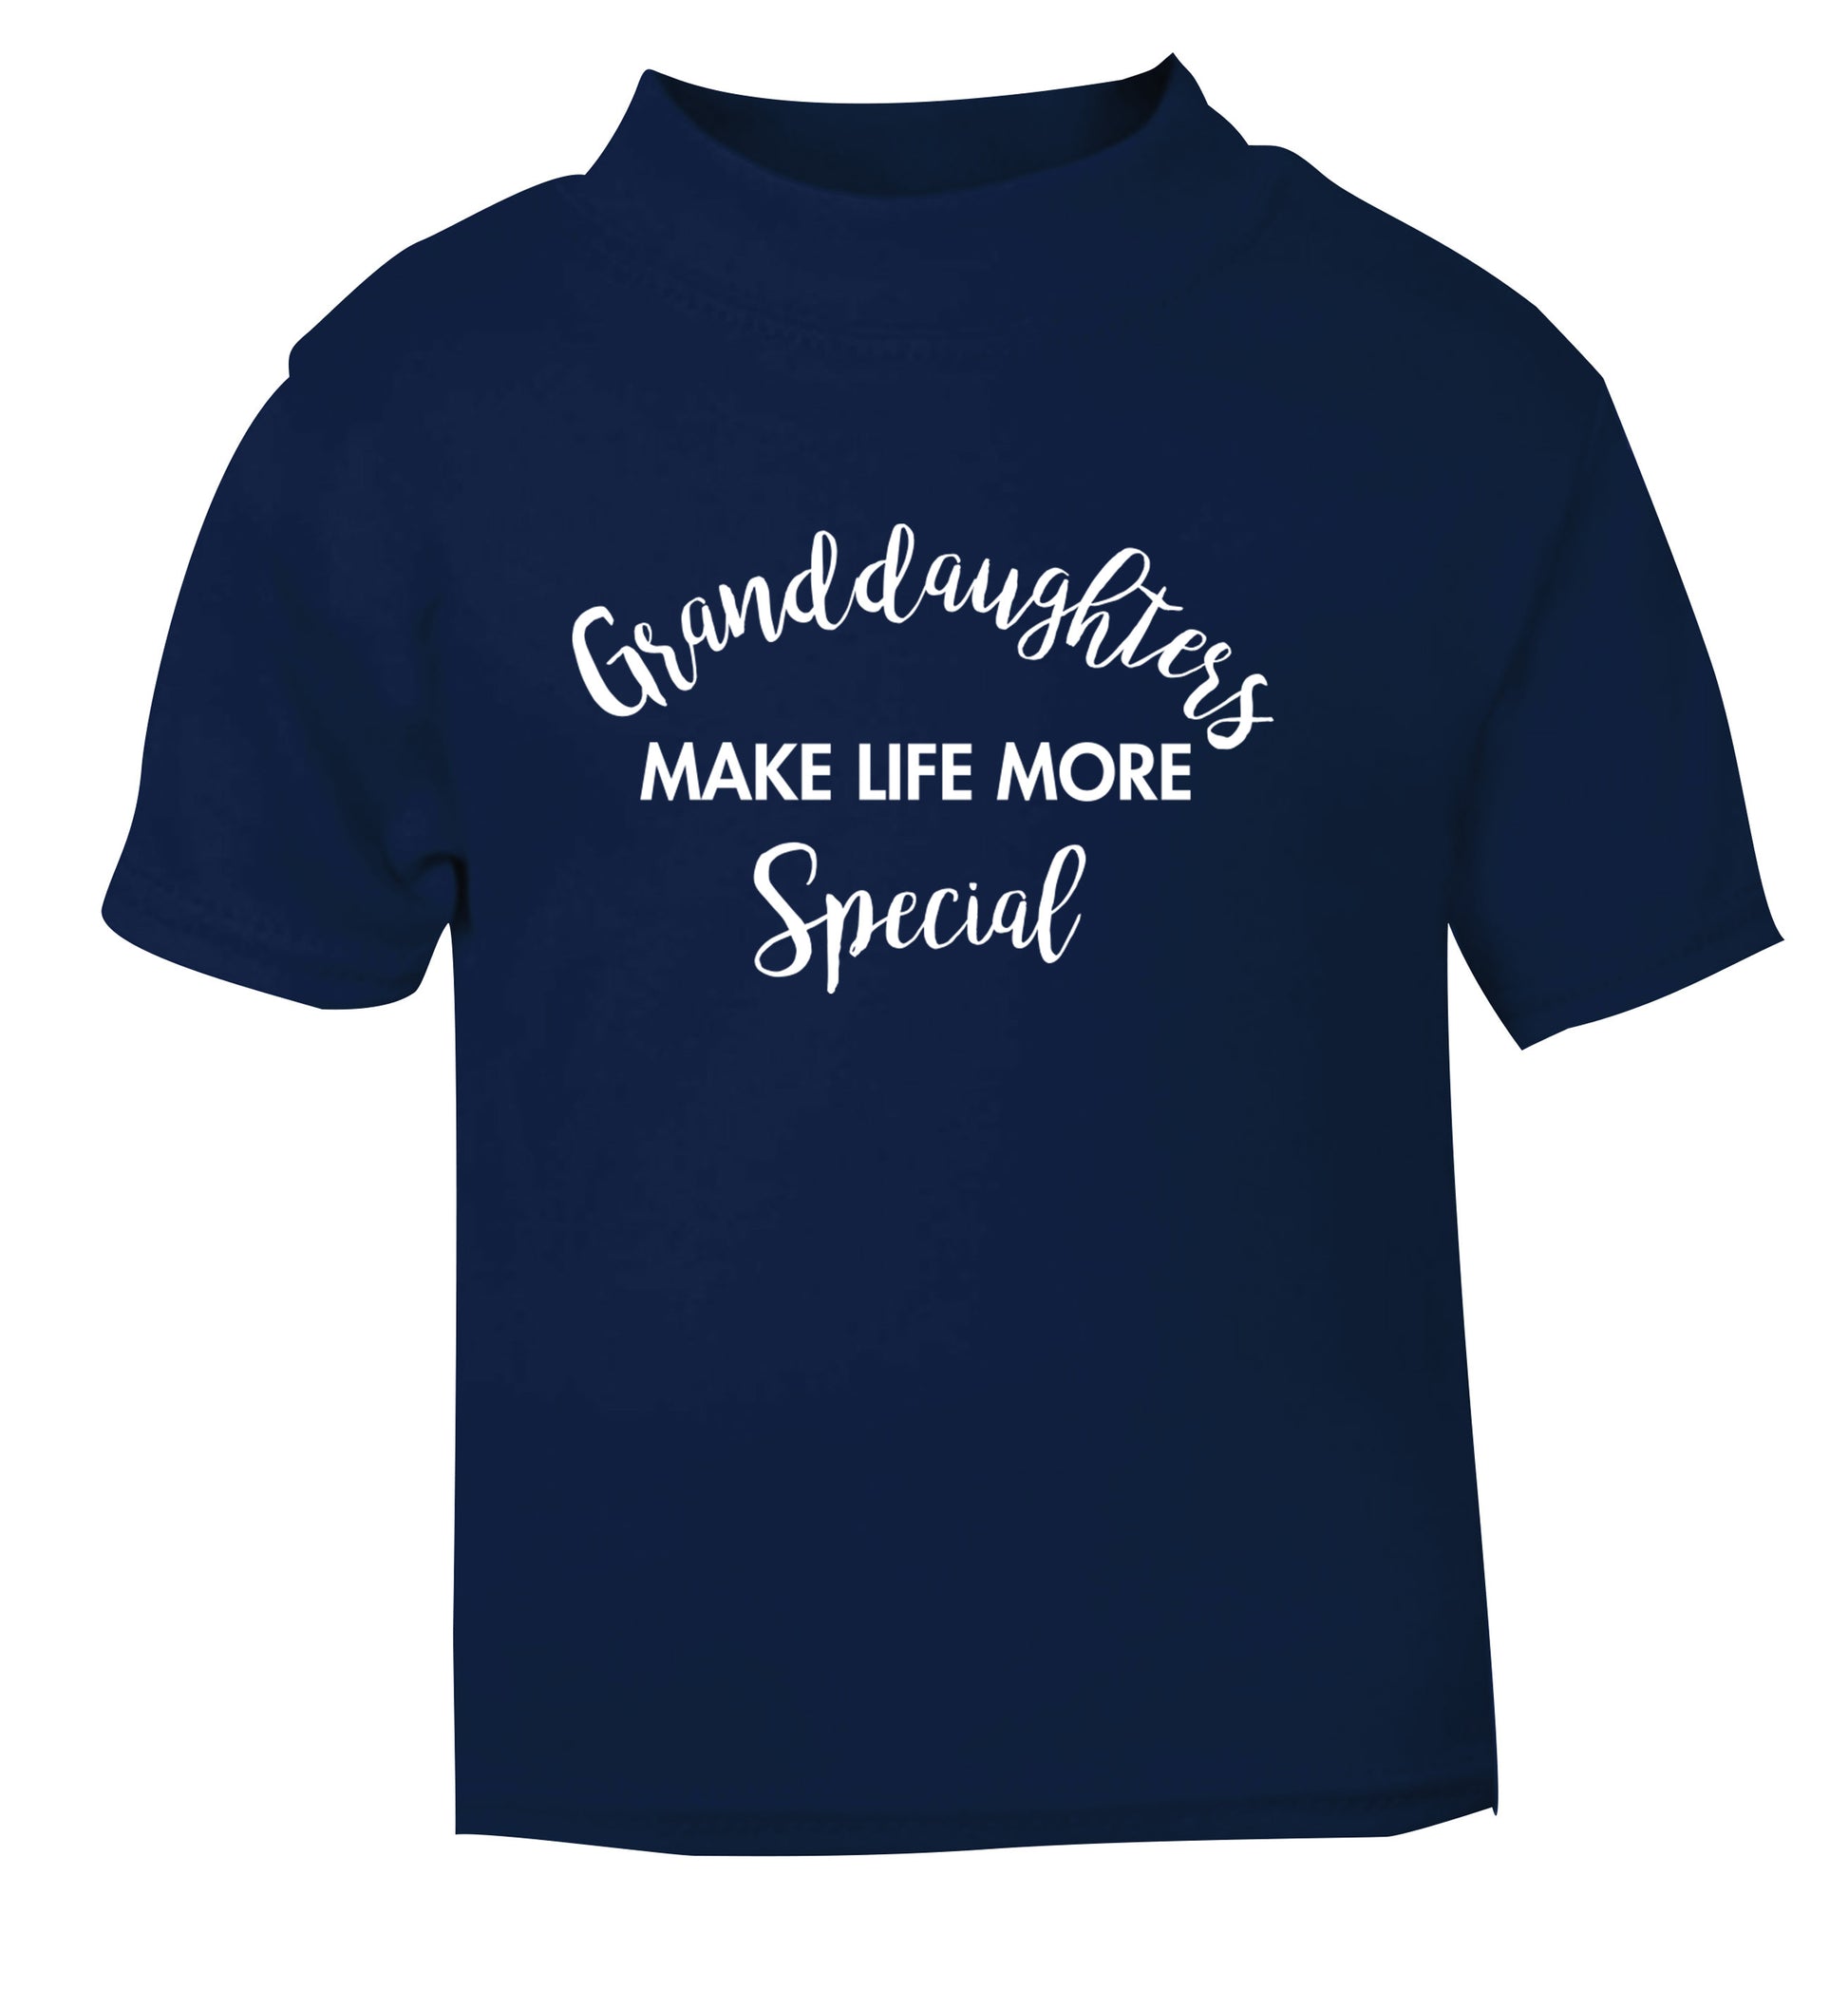 Granddaughters make life more special navy Baby Toddler Tshirt 2 Years